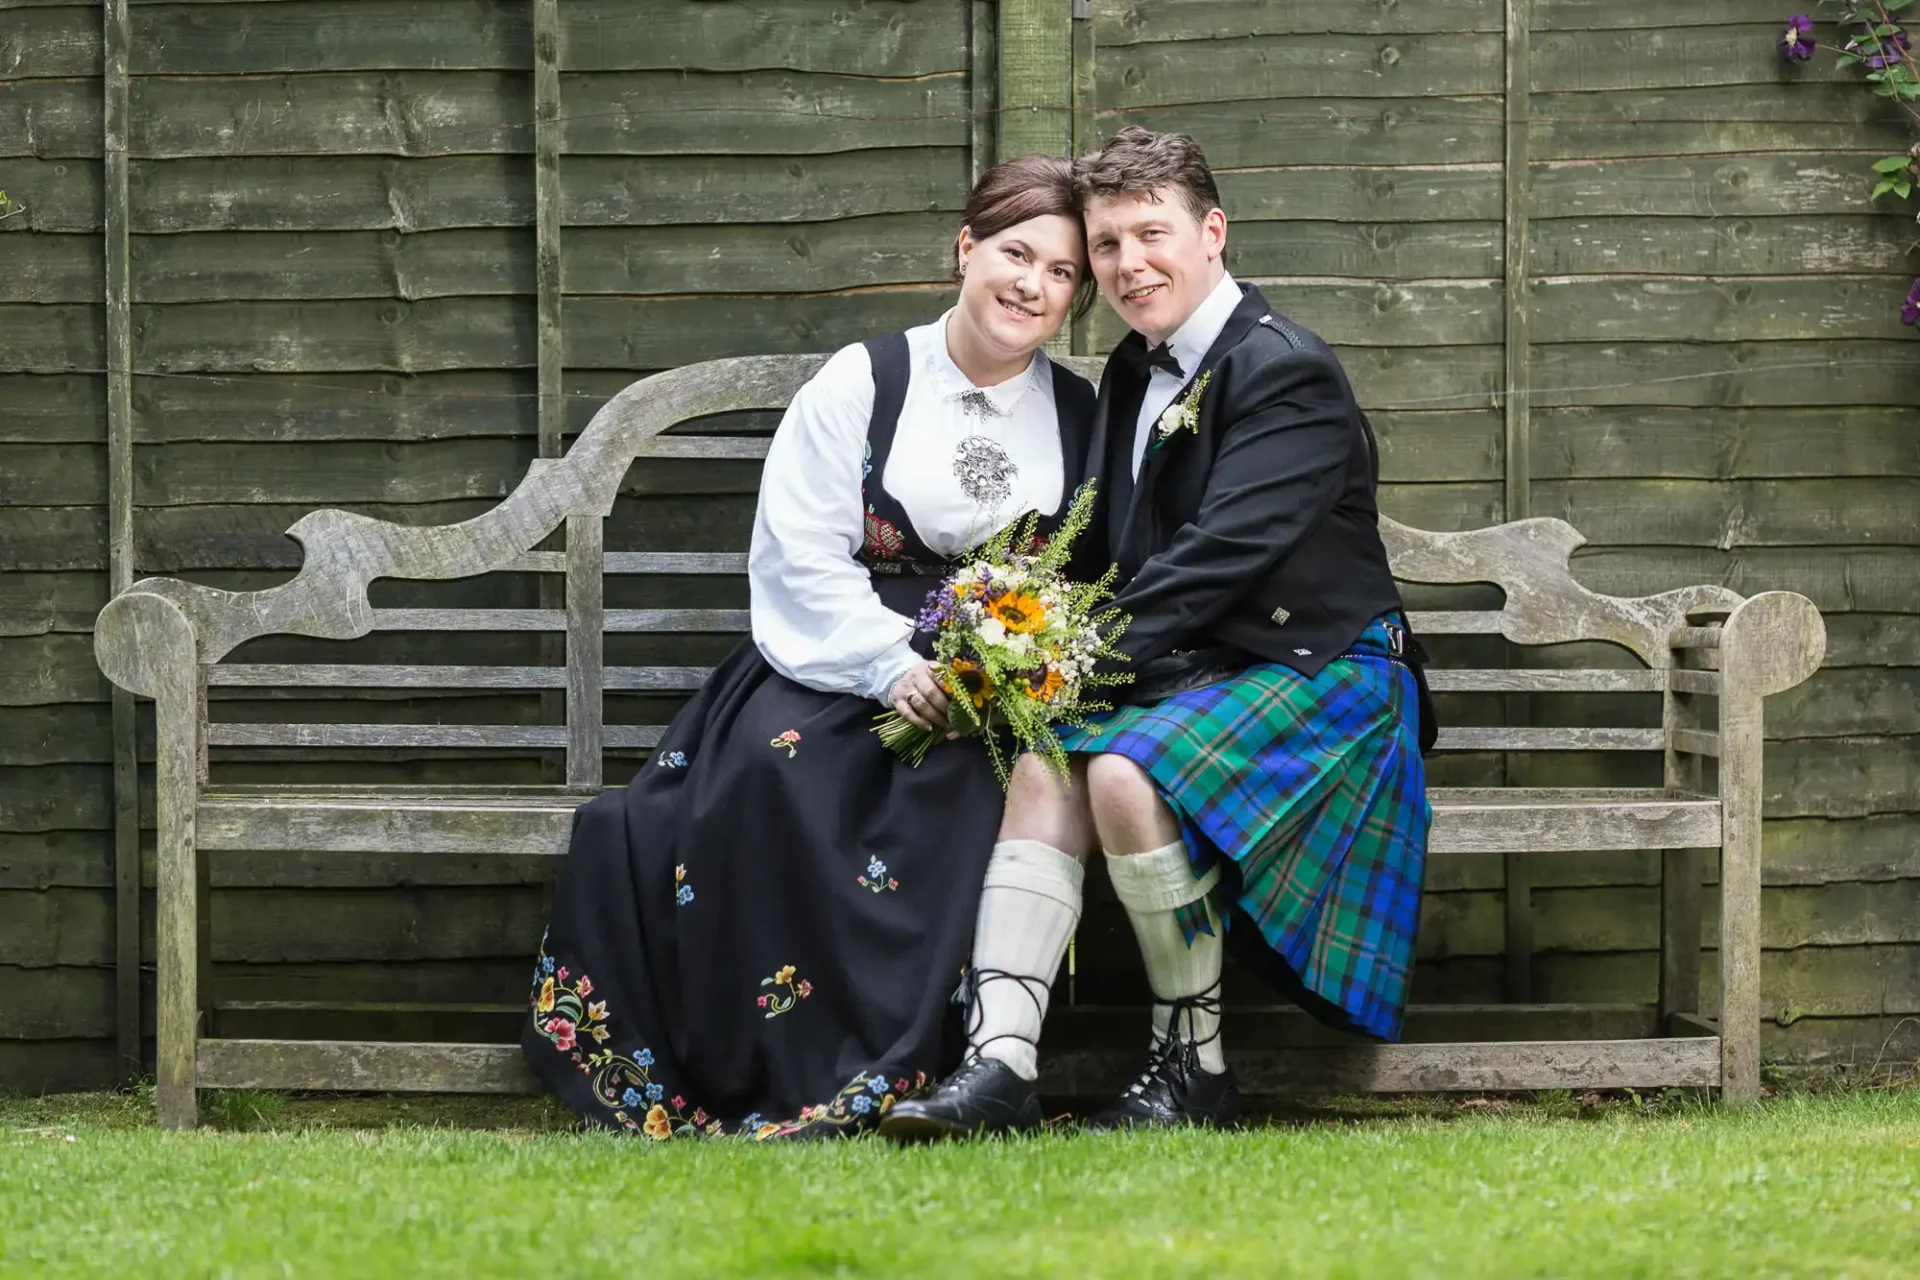 A couple in traditional scottish attire sitting closely on a garden bench, smiling at the camera, with a backdrop of a wooden fence and green grass.